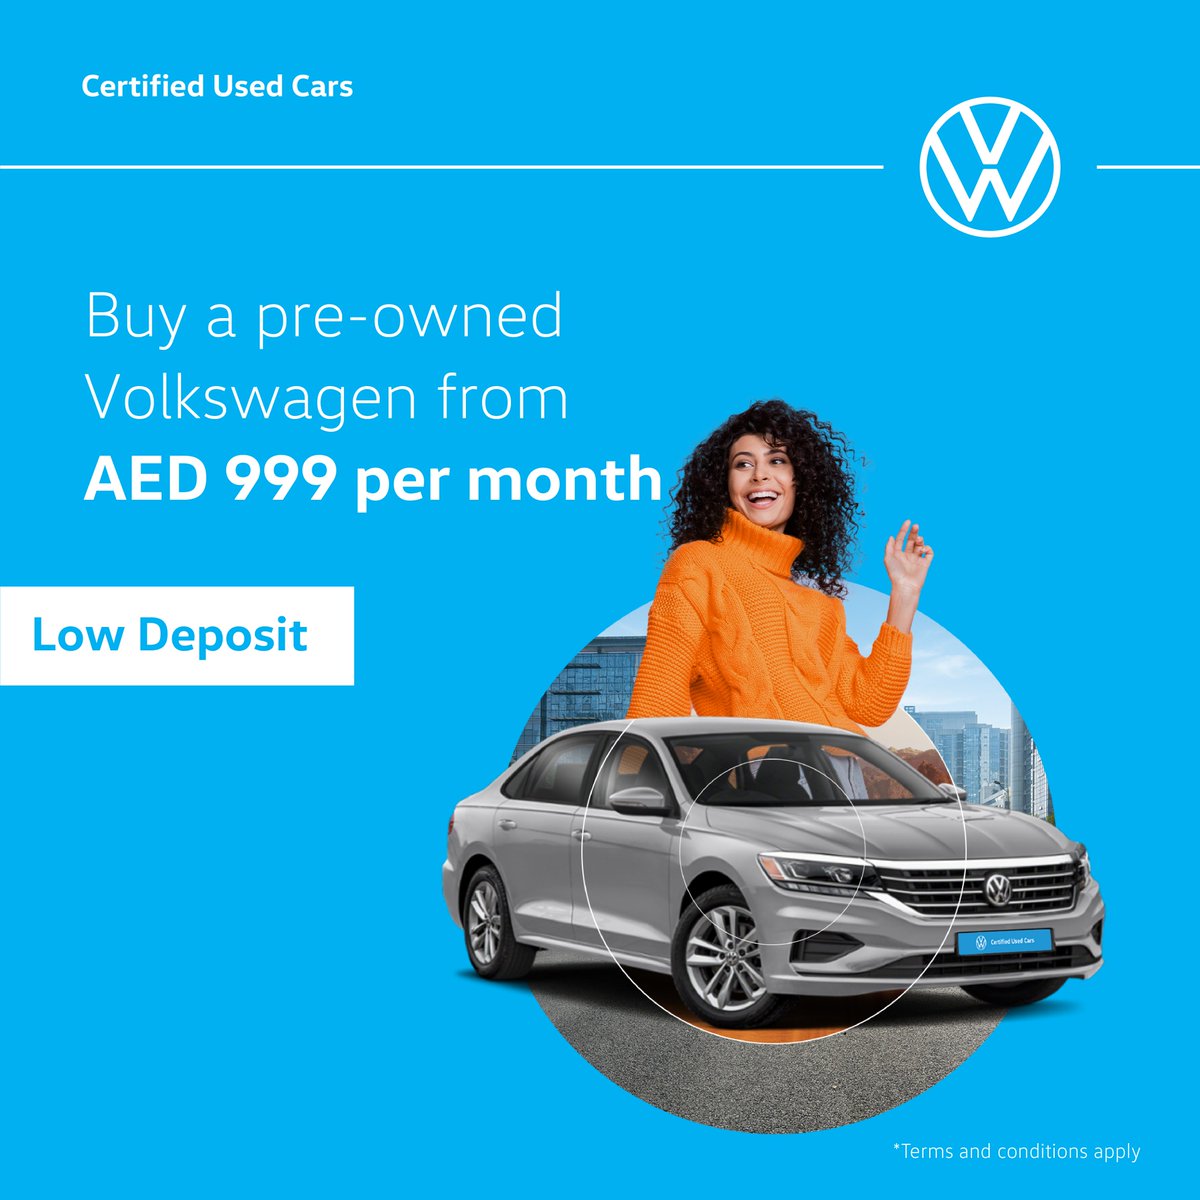 Own a Certified used Volkswagen from just AED 999 per month with a low deposit. Visit our showroom now to book yours. #VWDubai #AlNaboodaAutomobiles #CUC #Usedcars #Volkswagen